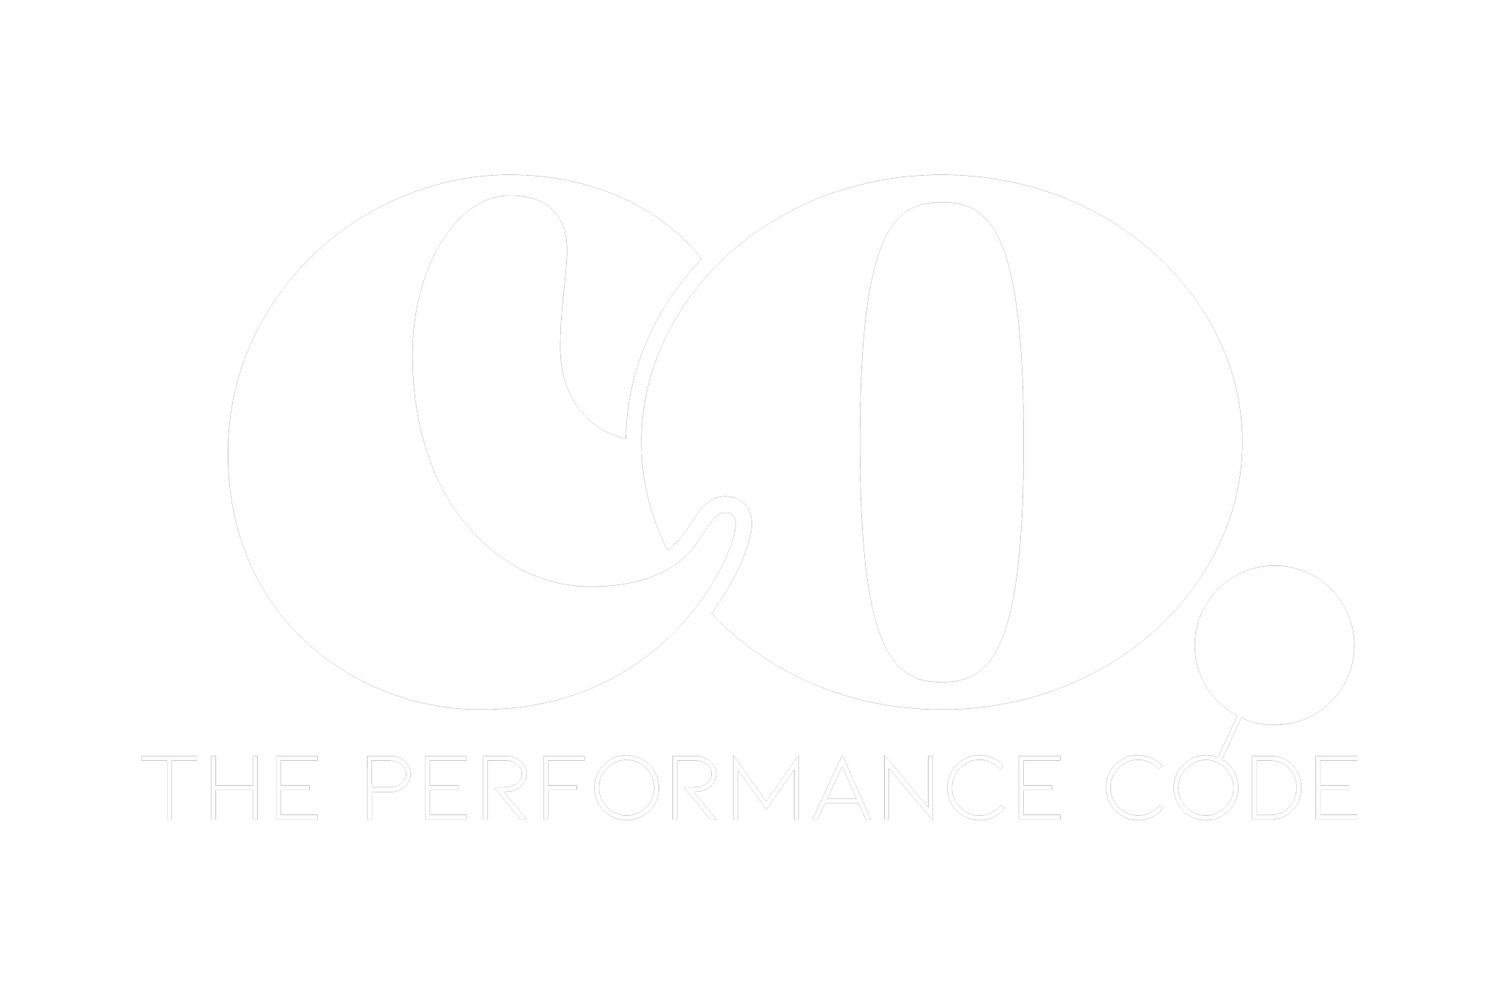 The Performance Code